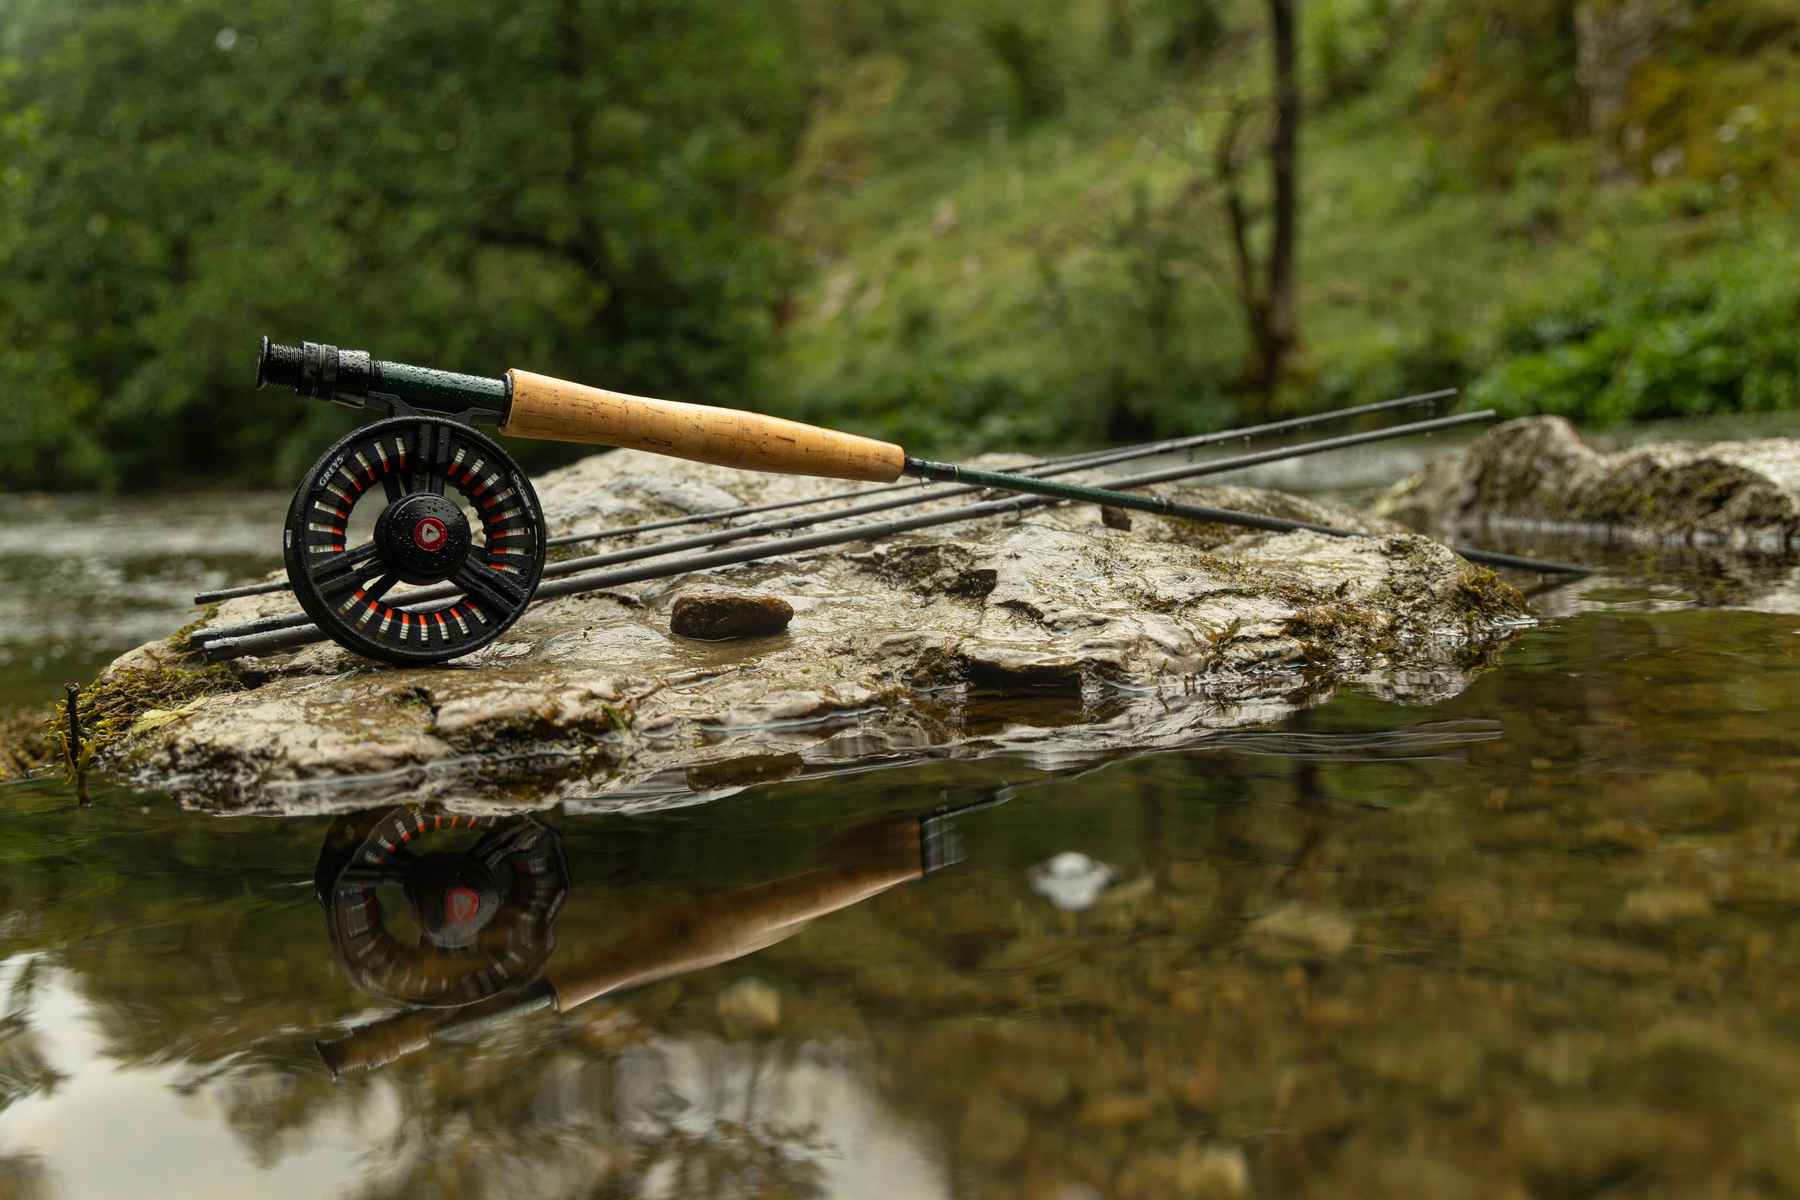 http://www.hatchmag.com/sites/default/files/styles/extra-large/public/field/image/0B5A9154.JPG